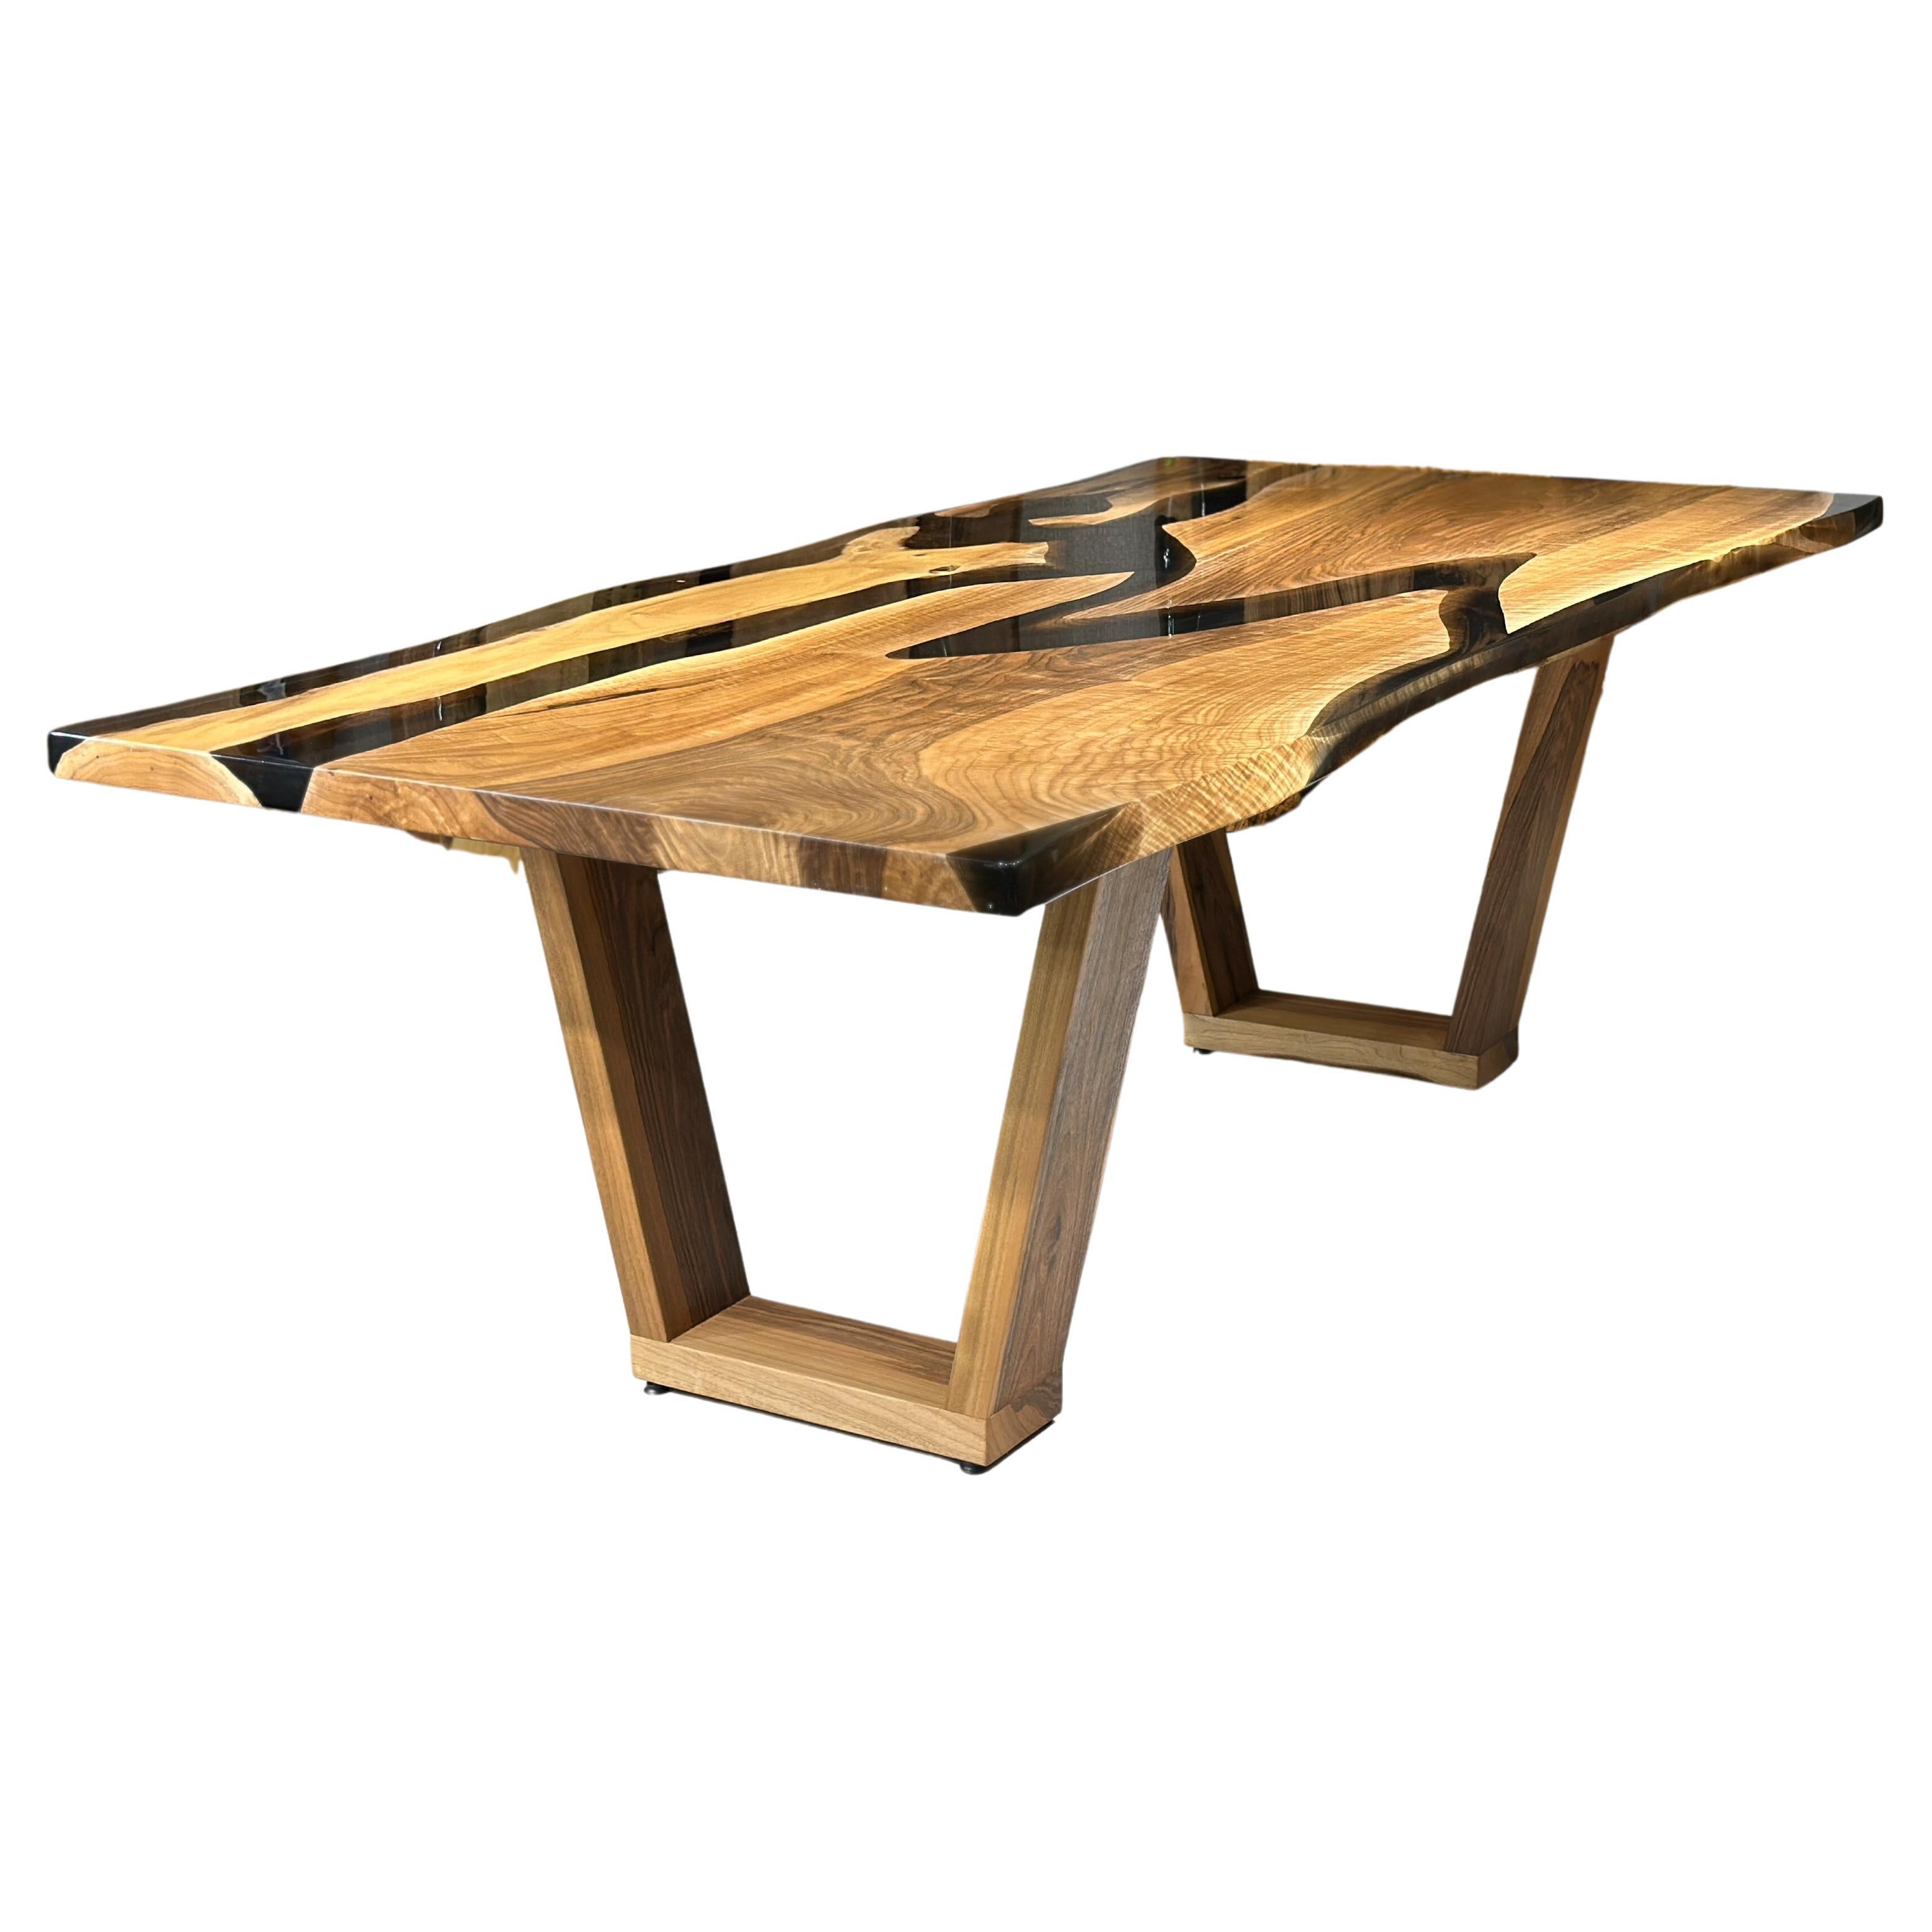 Walnut Black Transparent Epoxy Resin River Wooden Dining Table For Sale